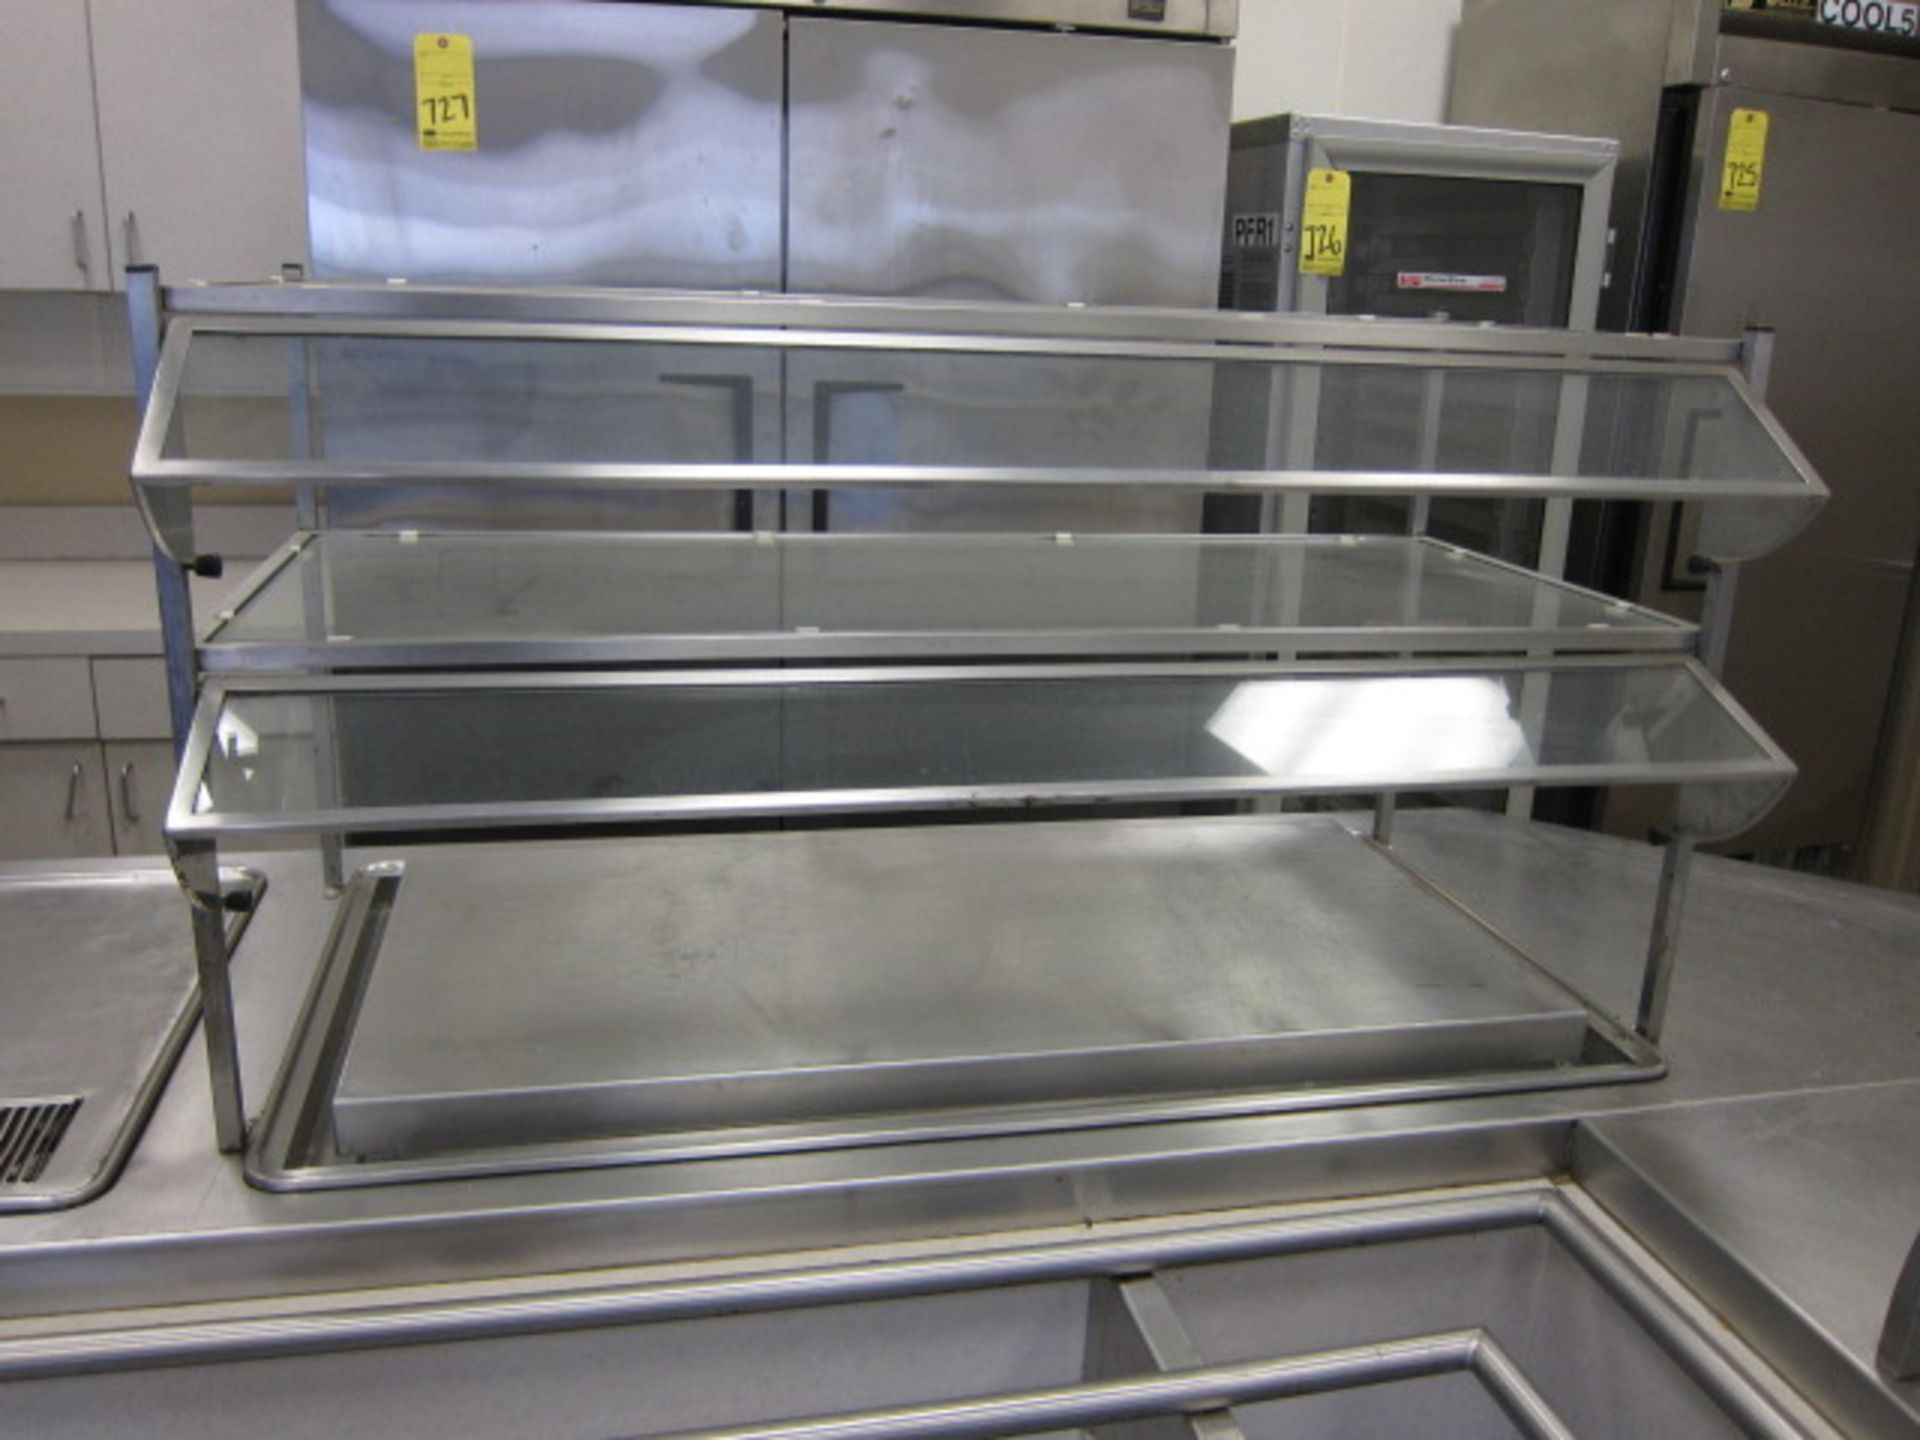 STAINLESS STEEL CAFETERIA LINE w/tray rail, built-in steam table pans & salad station - Image 3 of 10